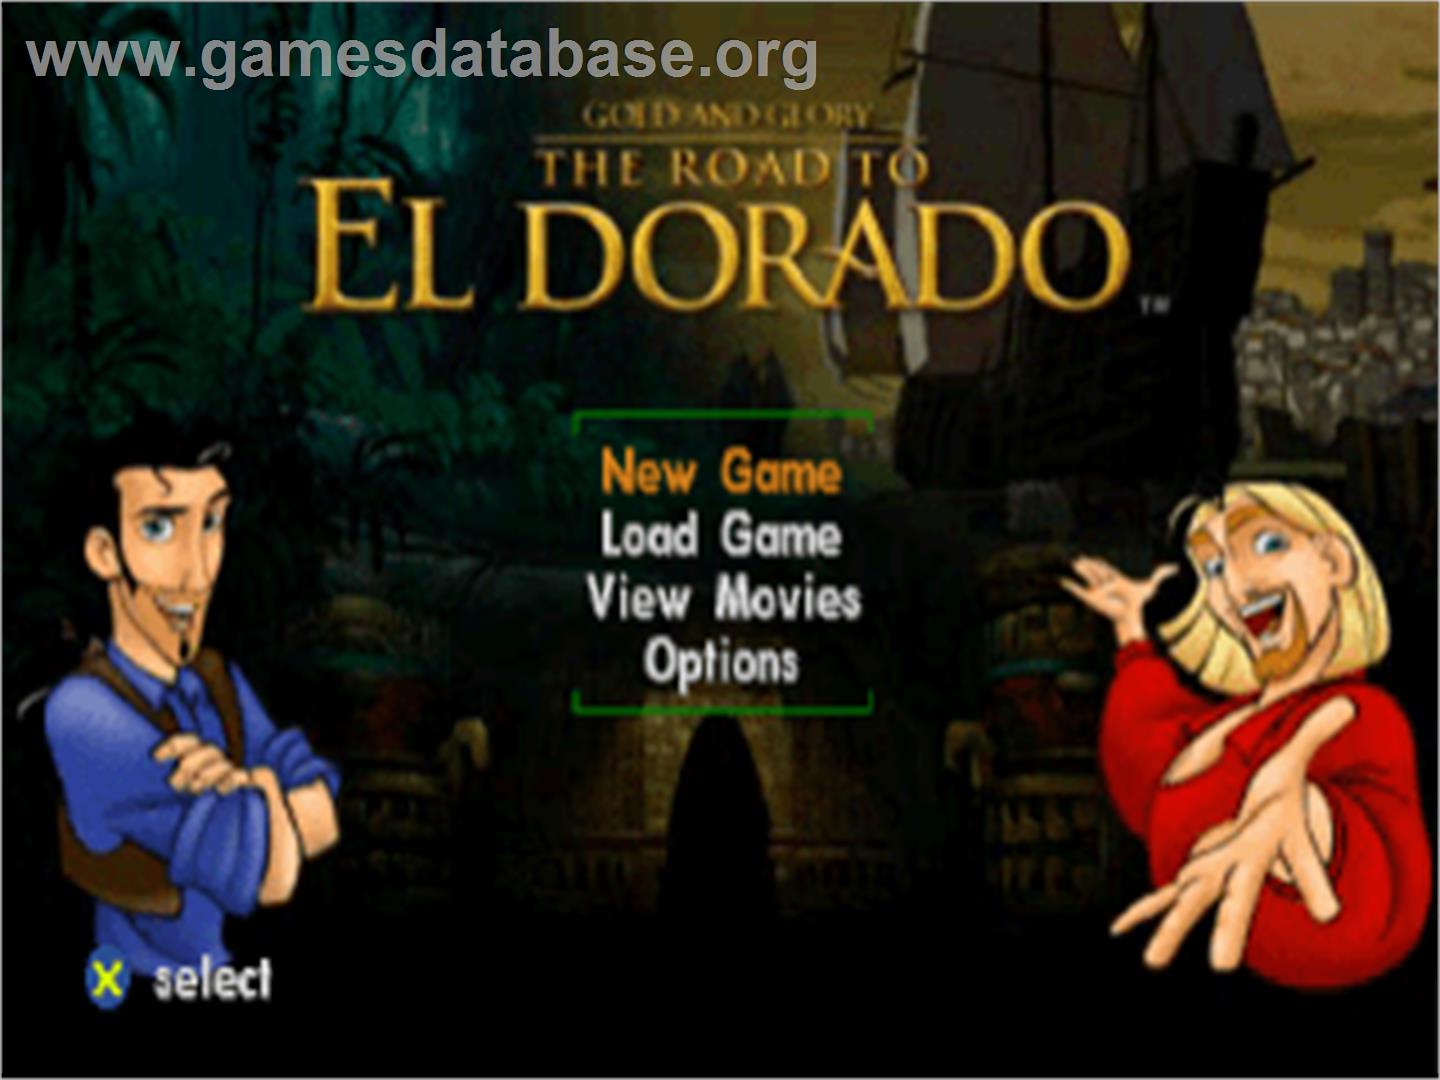 Gold and Glory: The Road to El Dorado - Sony Playstation - Artwork - Title Screen